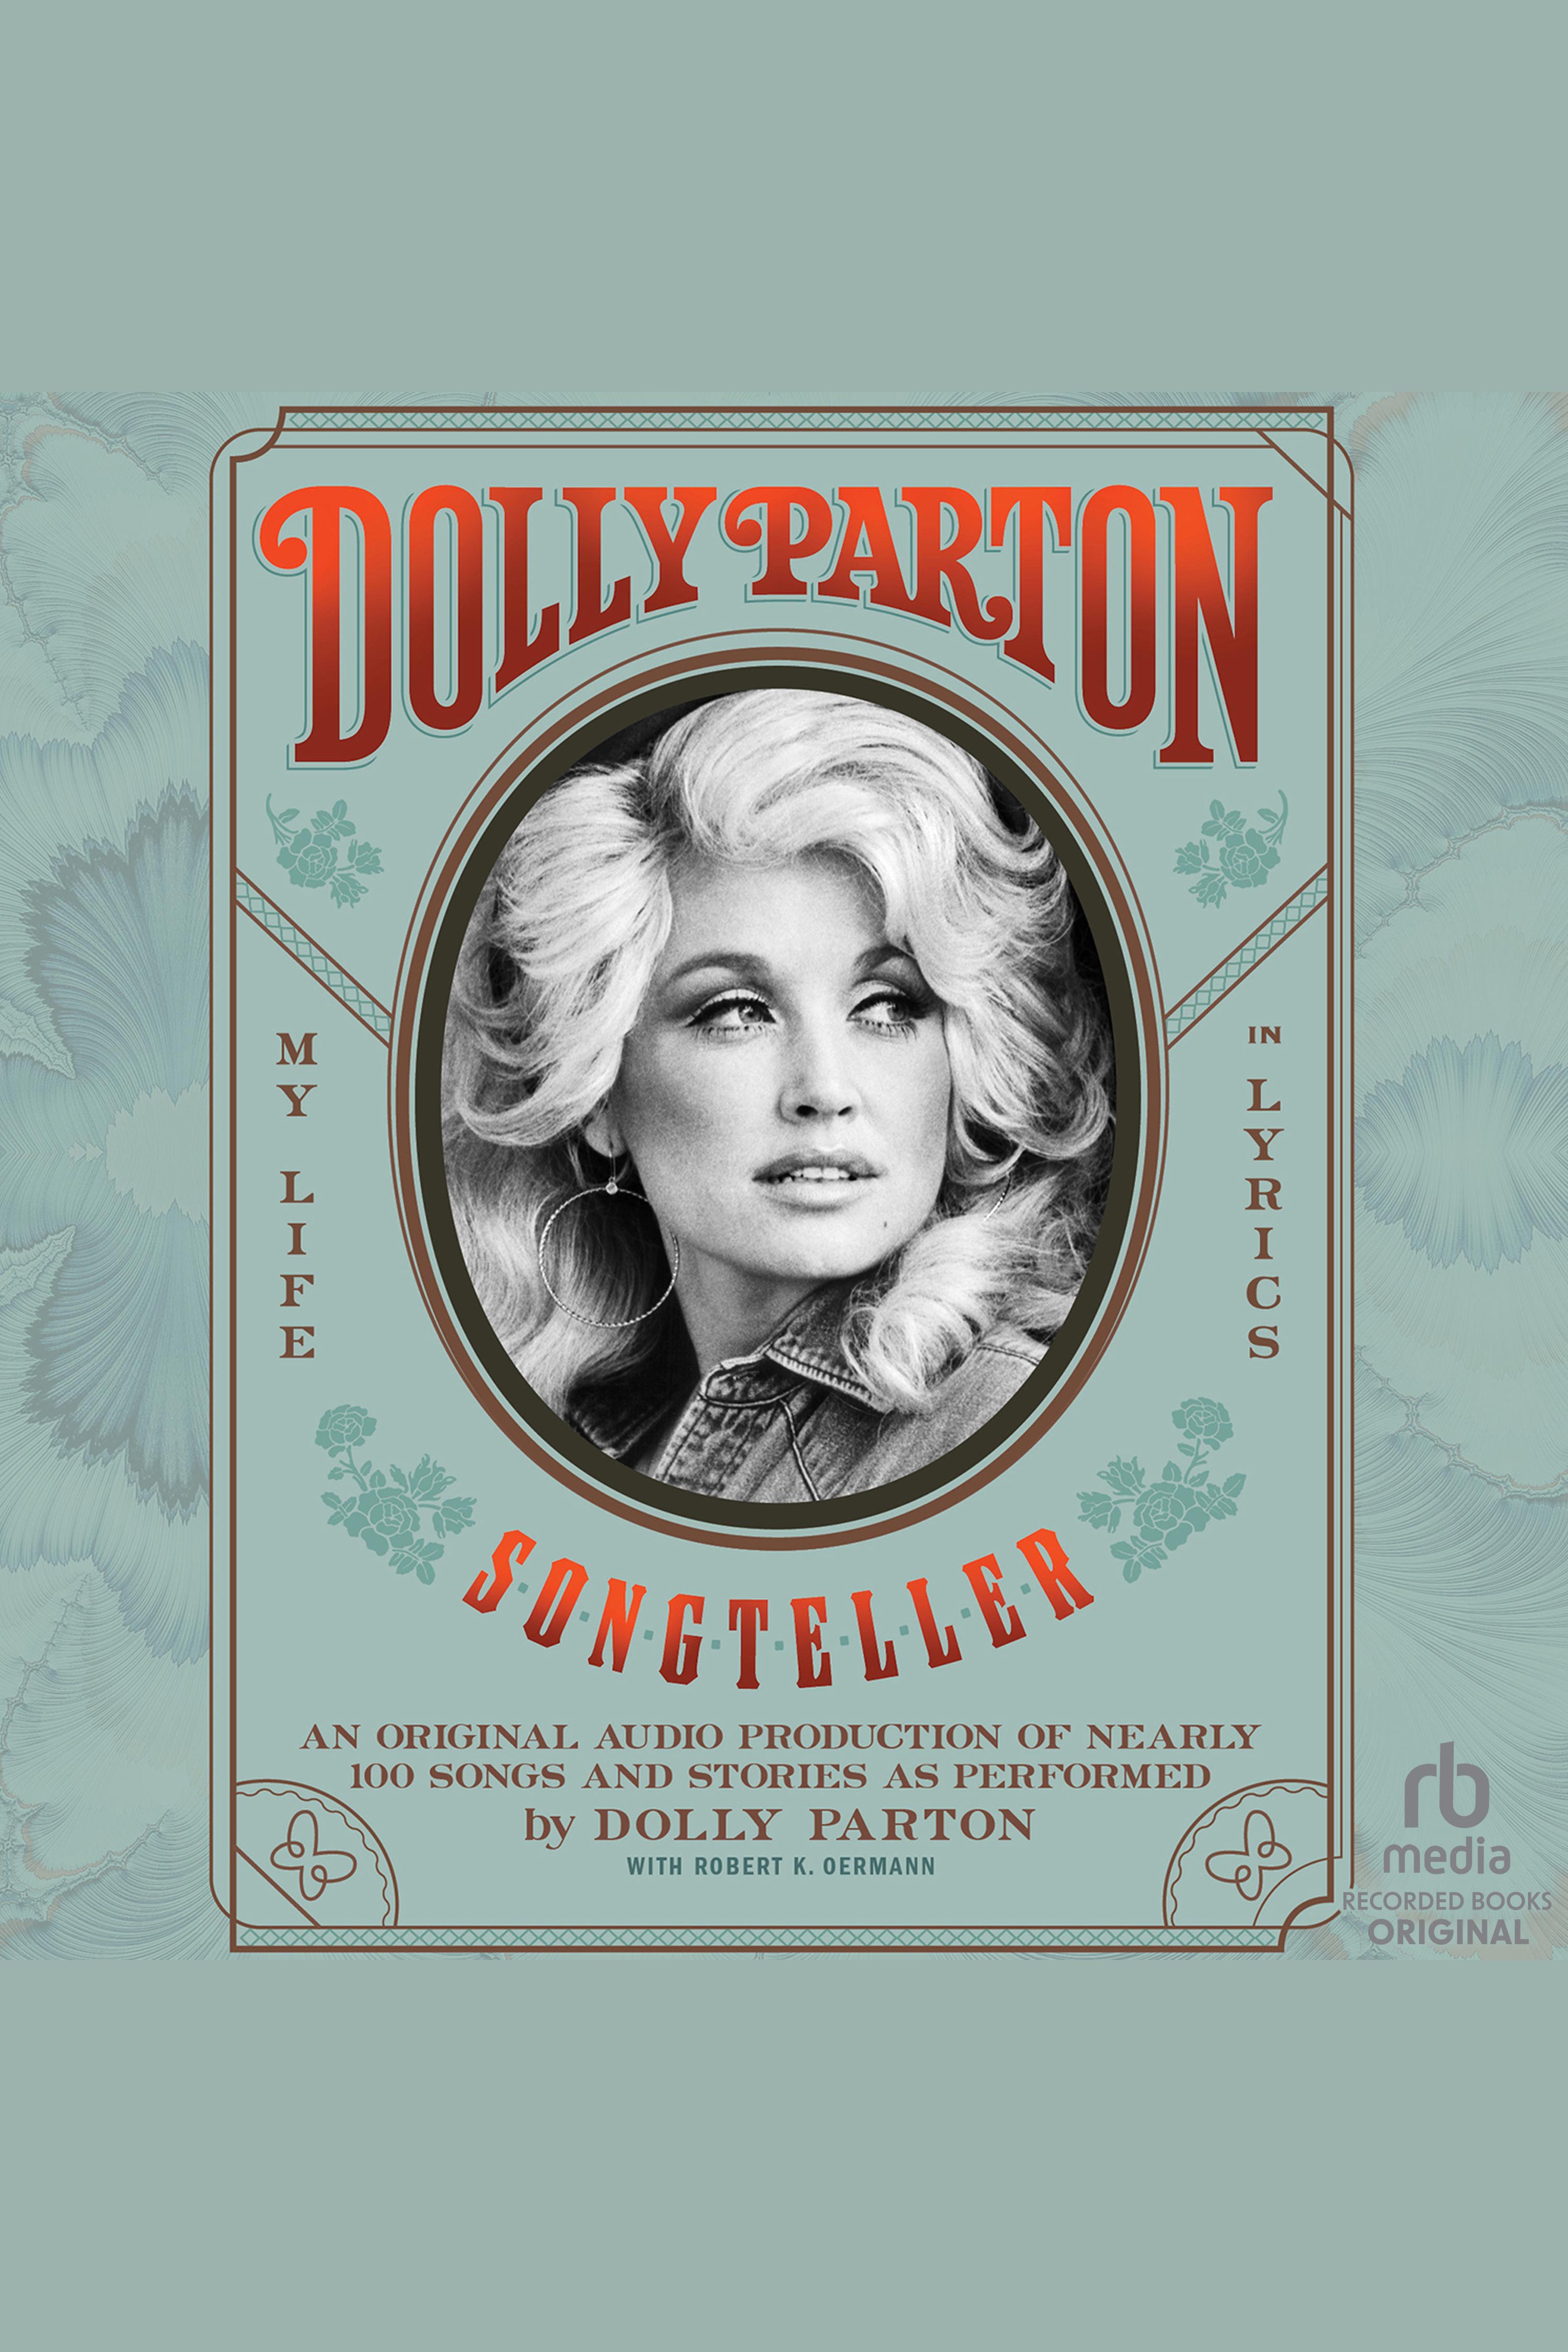 Dolly Parton, Songteller My Life in Lyrics cover image